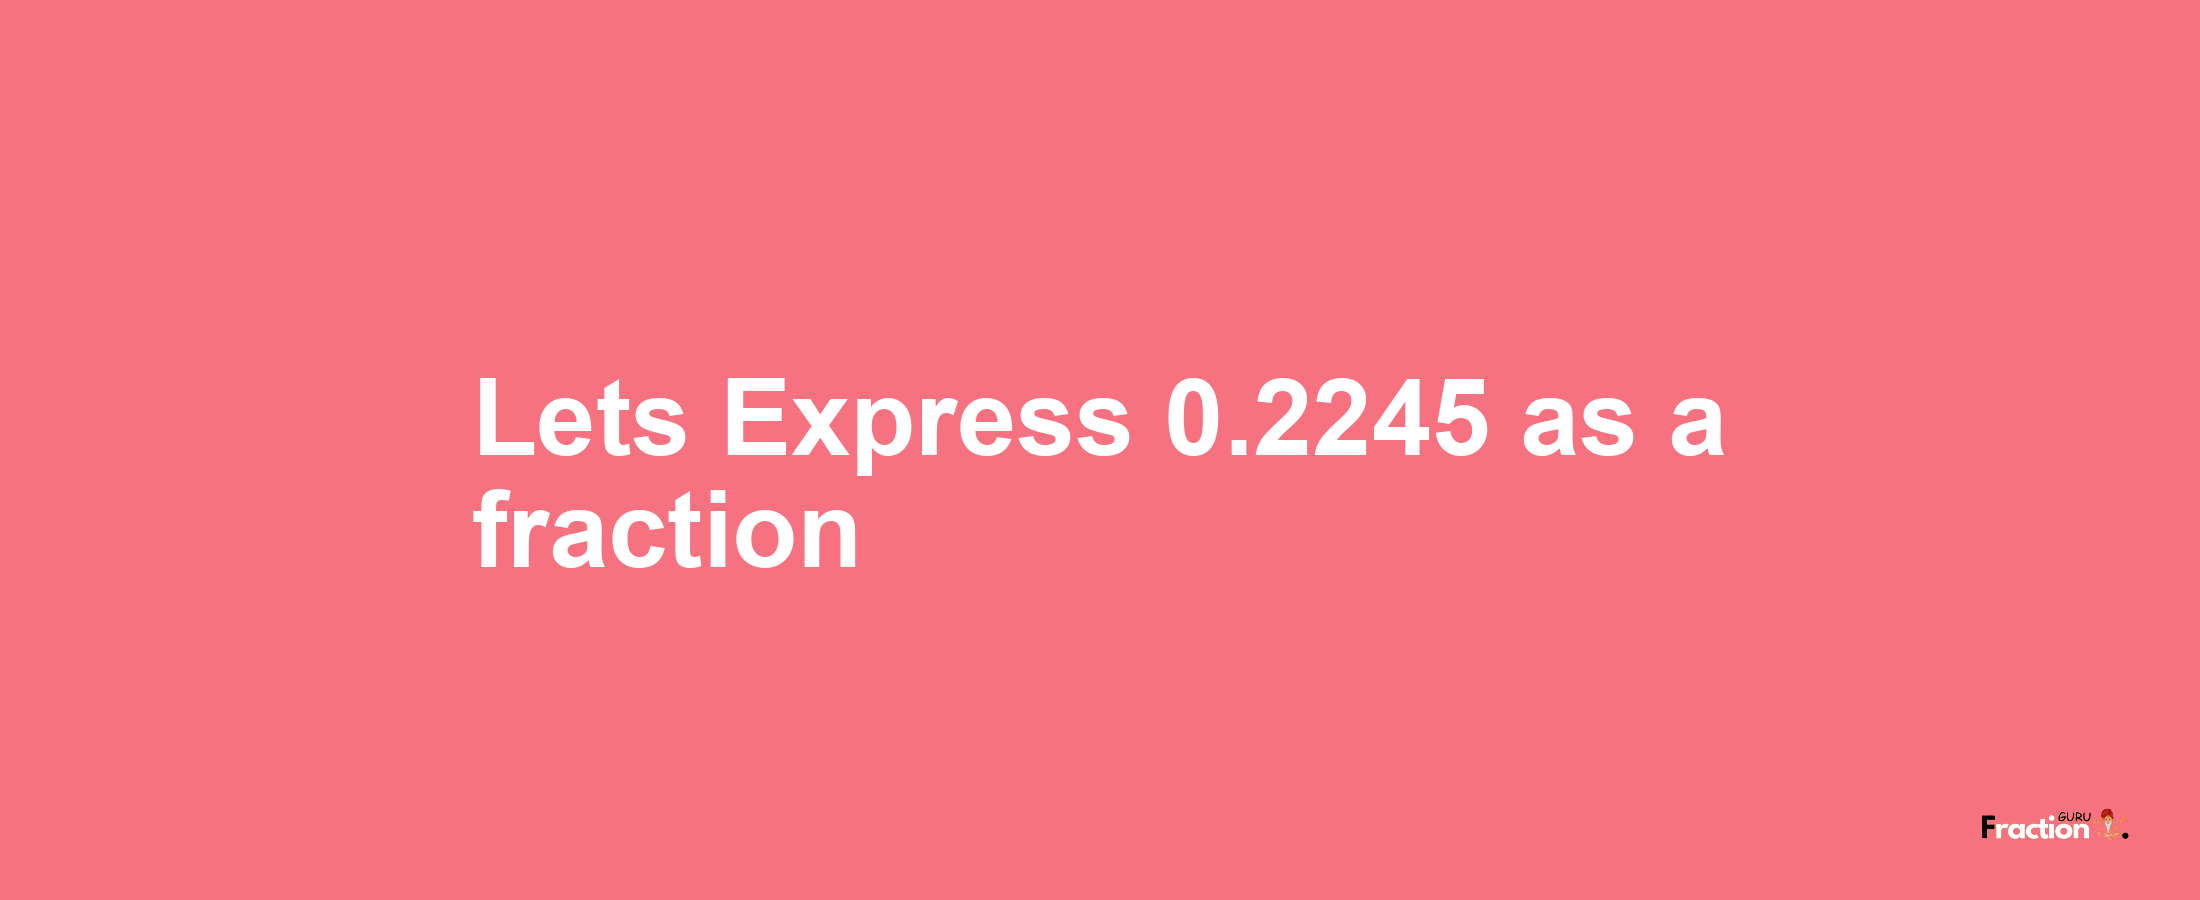 Lets Express 0.2245 as afraction